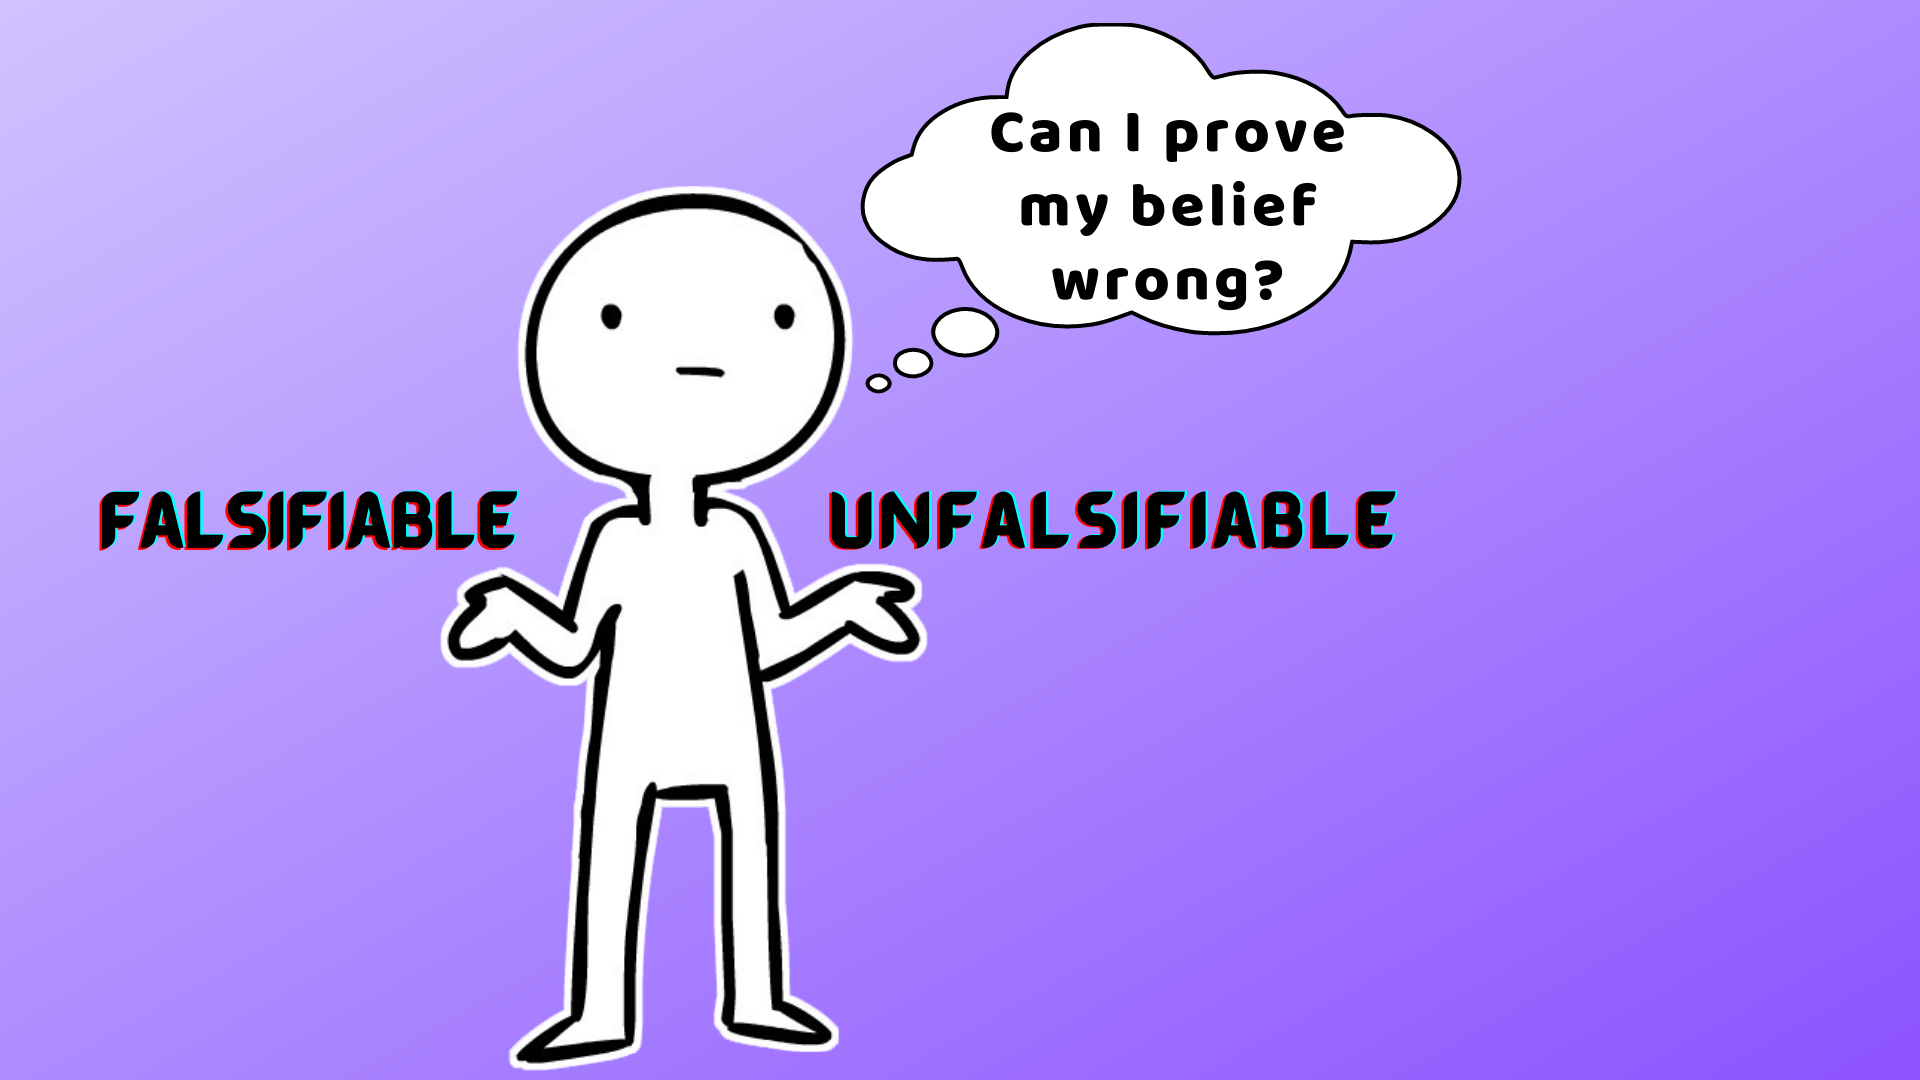 Person asking Can I prove my belief wrong? Has two outstretched hands with one that says falsifiable and the other unfalsifiable.